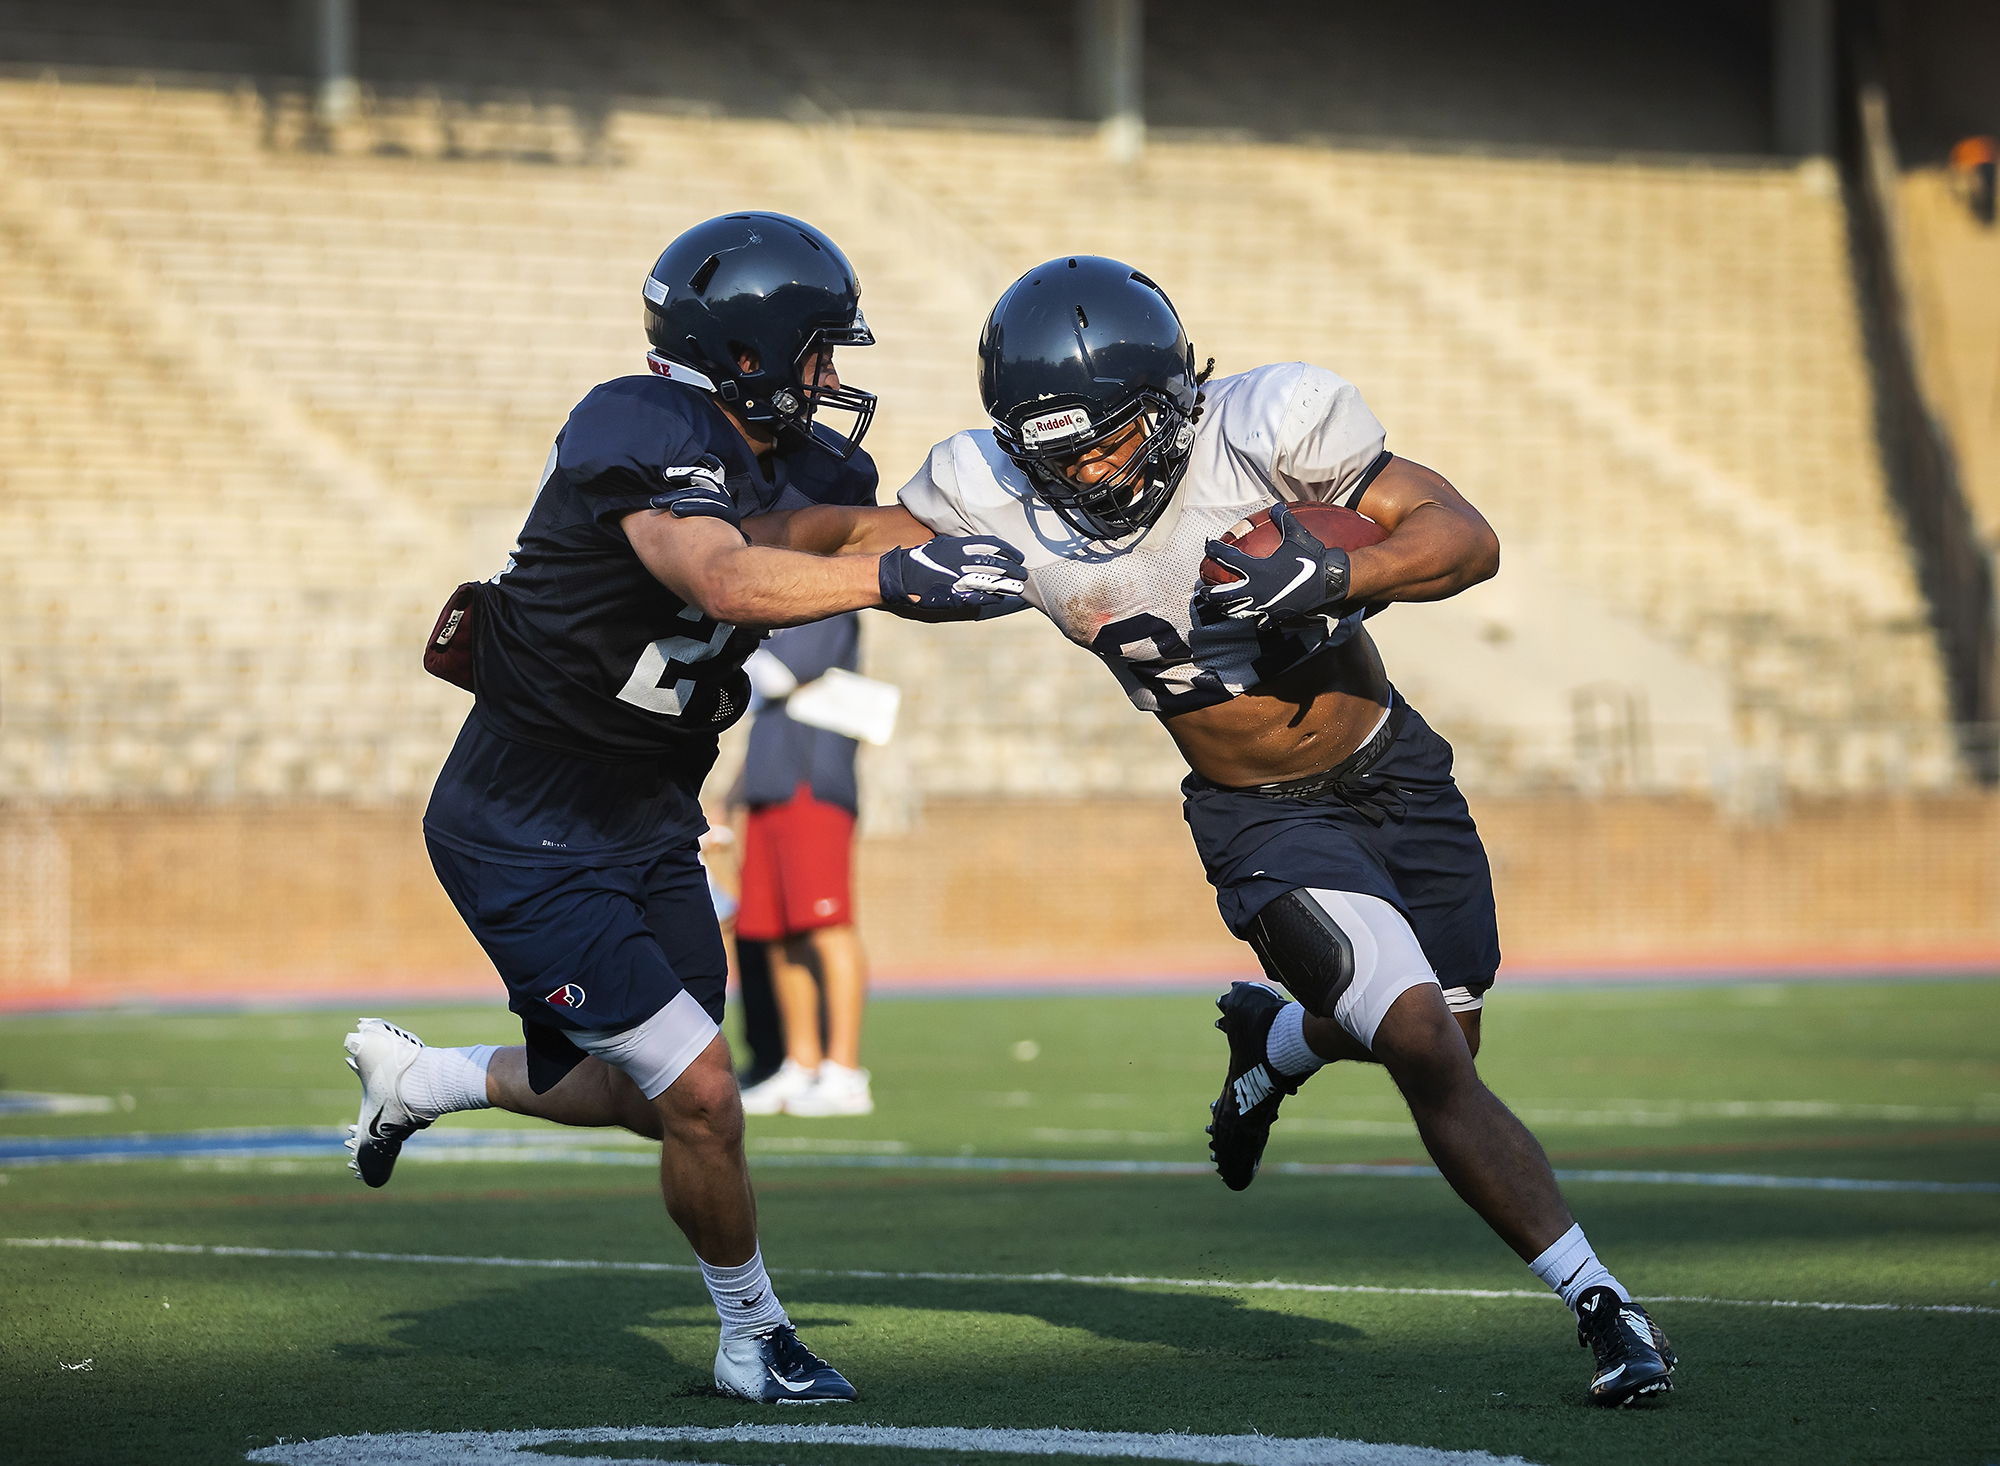 A defender attempts to tackle a running back during Penn football preseason practice at Franklin Field.